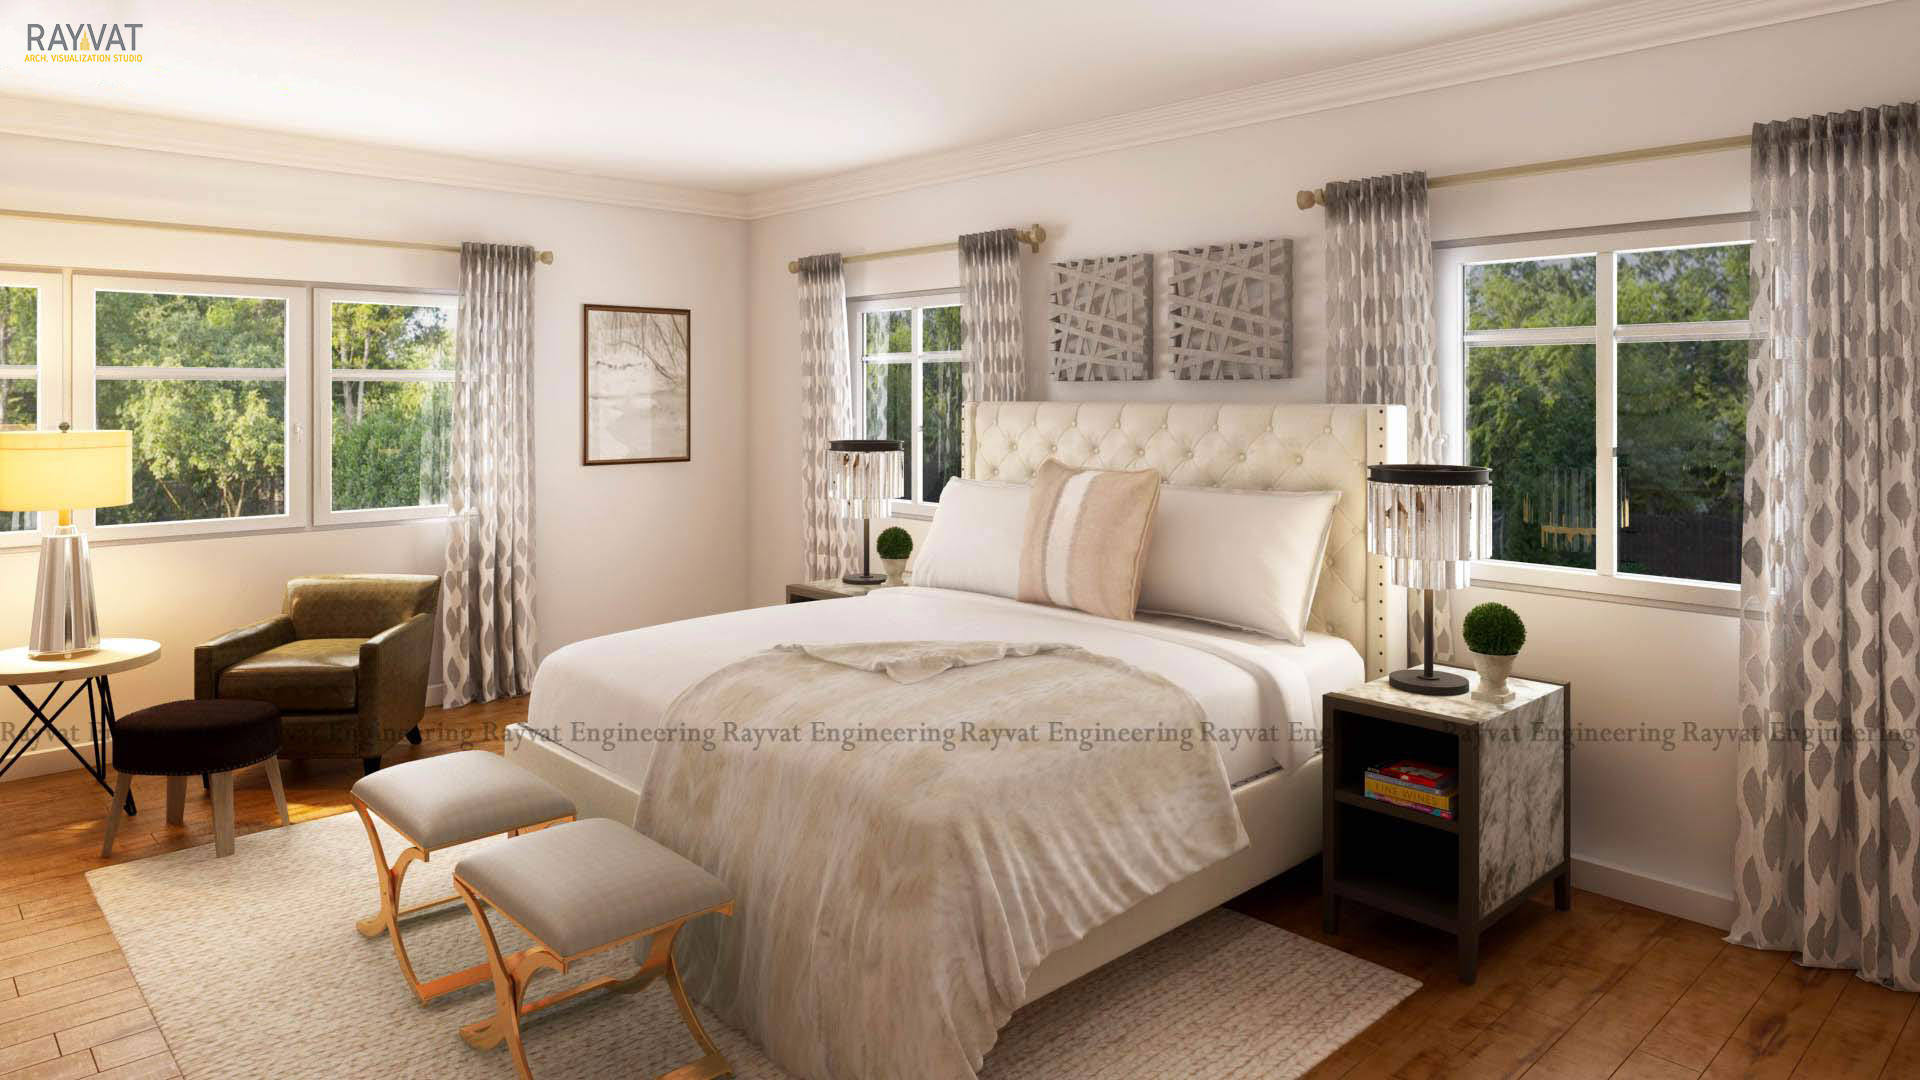 3D Rendering Services Raleigh, North Carolina